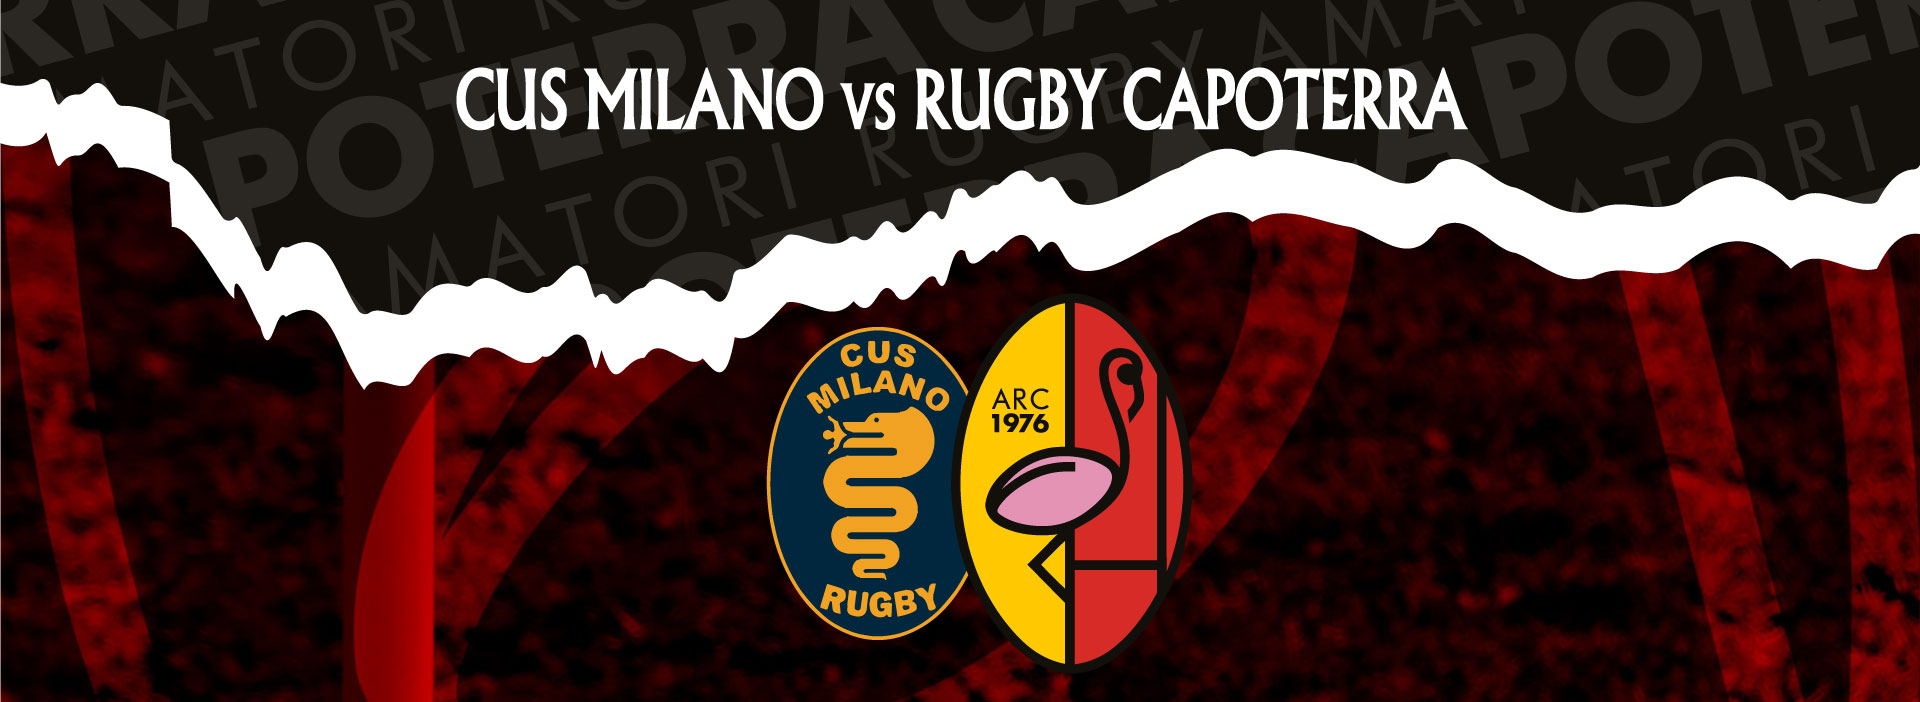 Cus Milano vs Rugby Capoterra